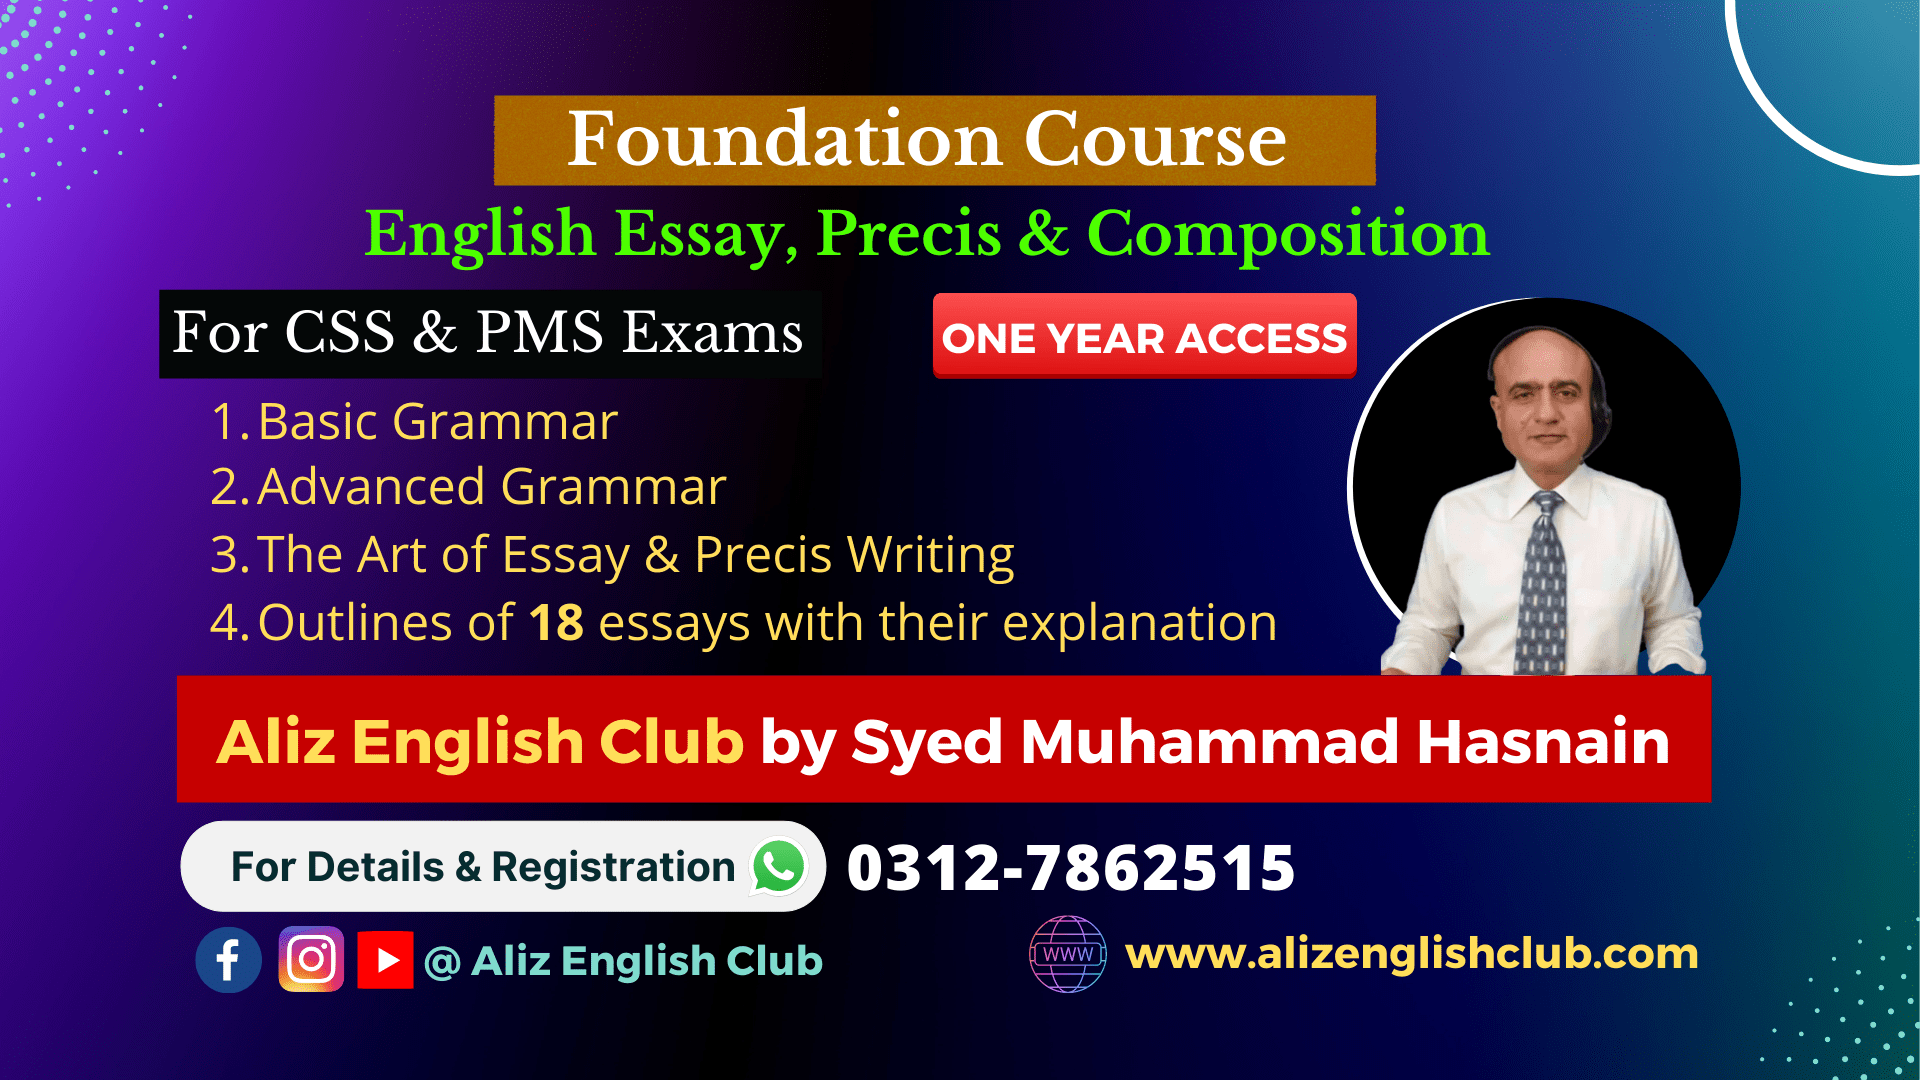 Foundation course on english essay, precis and composition paper for CSS and PMS exams